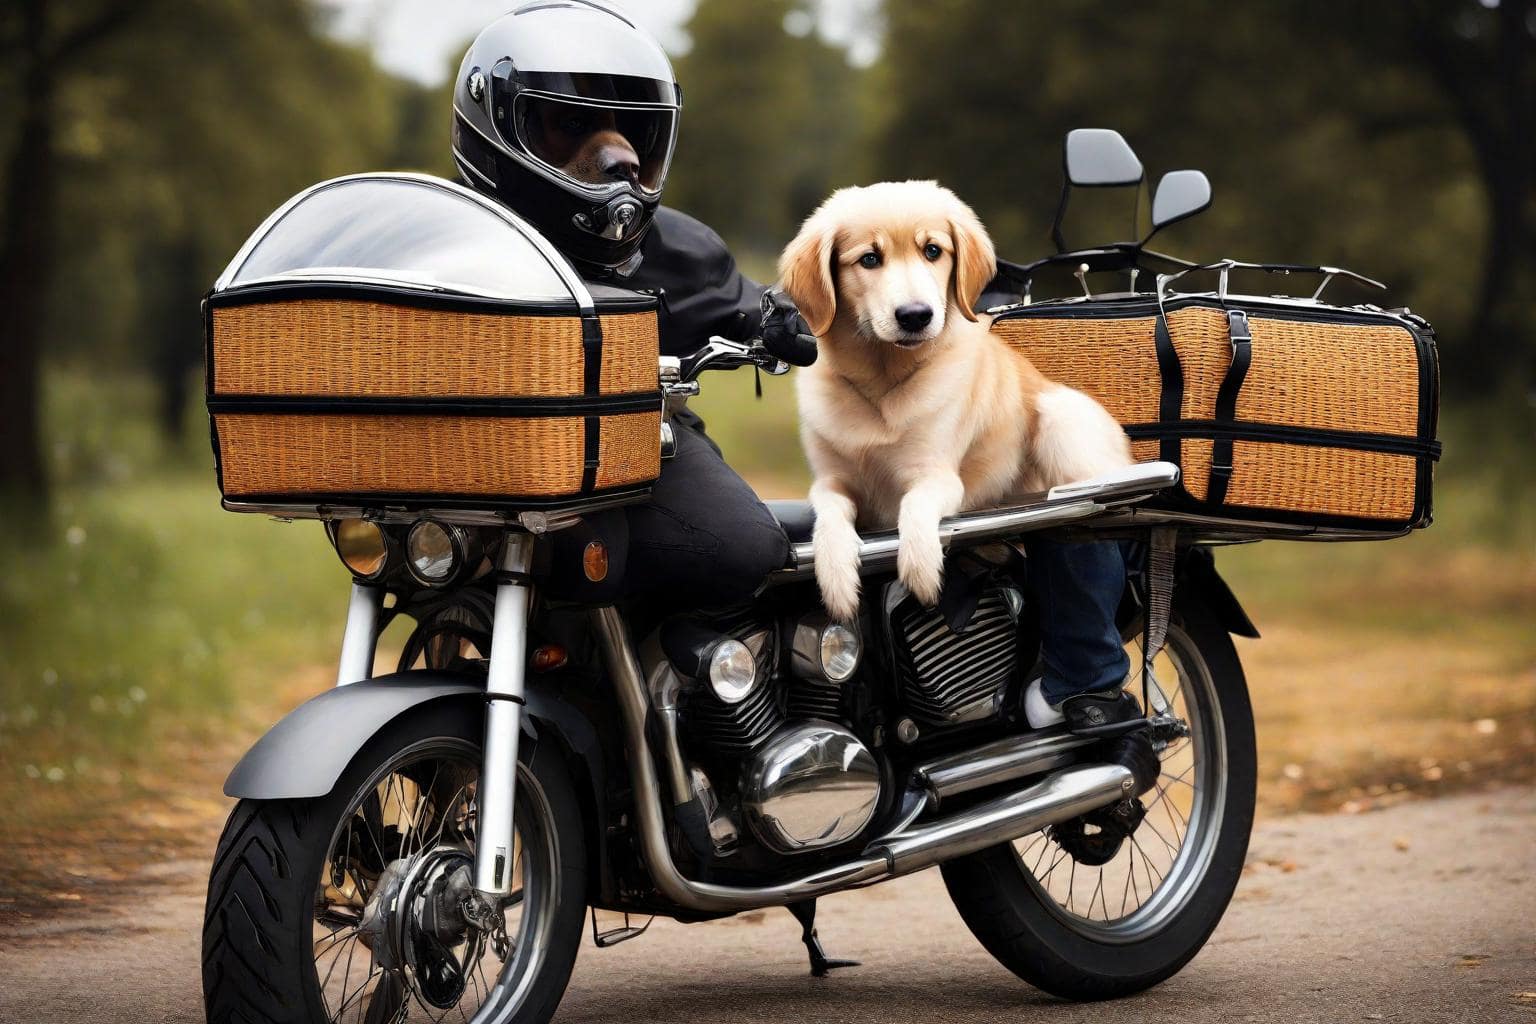 carrier for dog on motorcycle